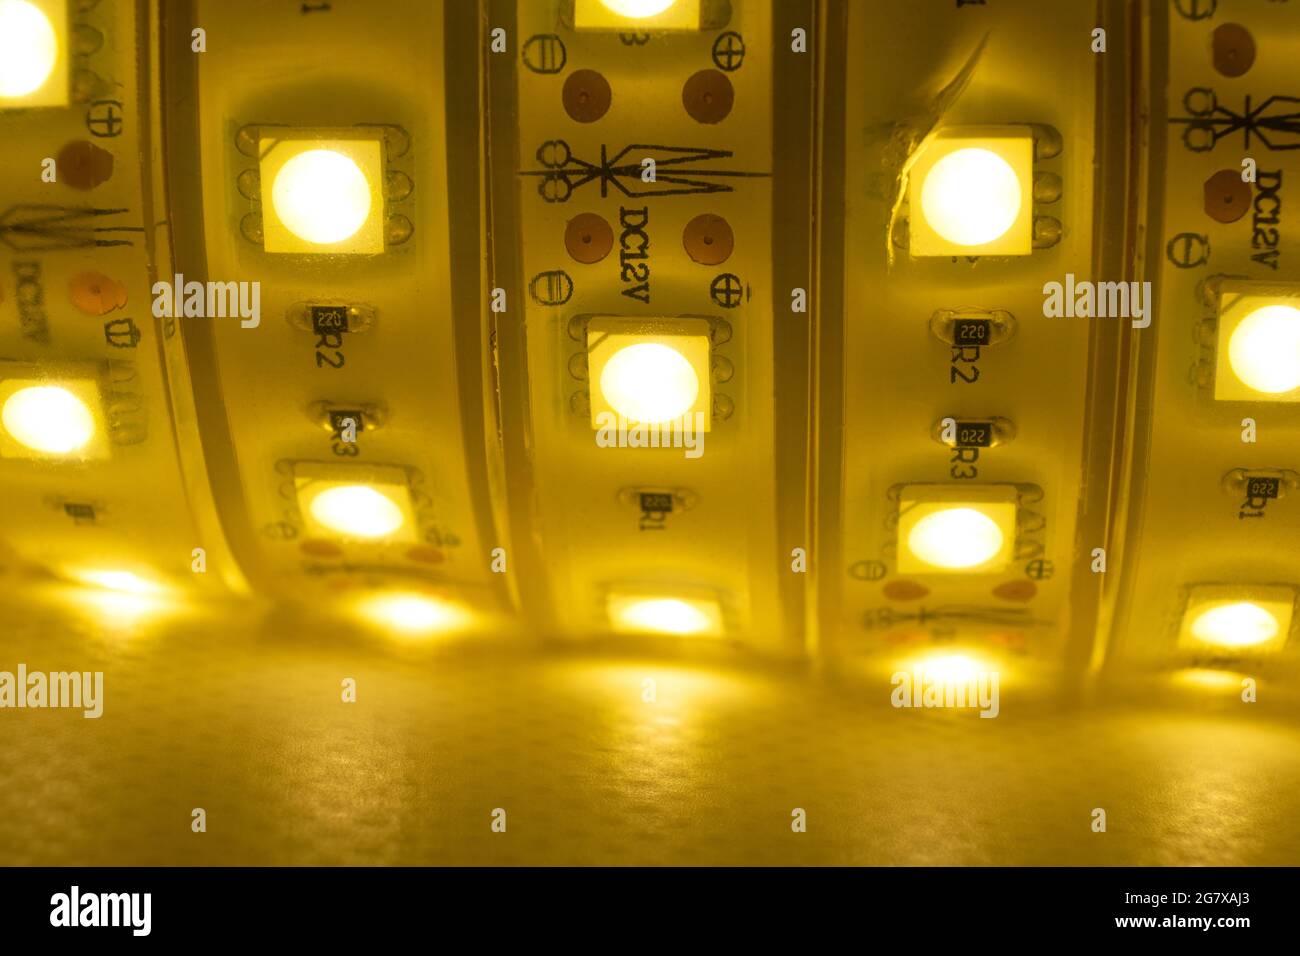 glowing LED strip of warm light for mounting decorative lighting for homes. Stock Photo